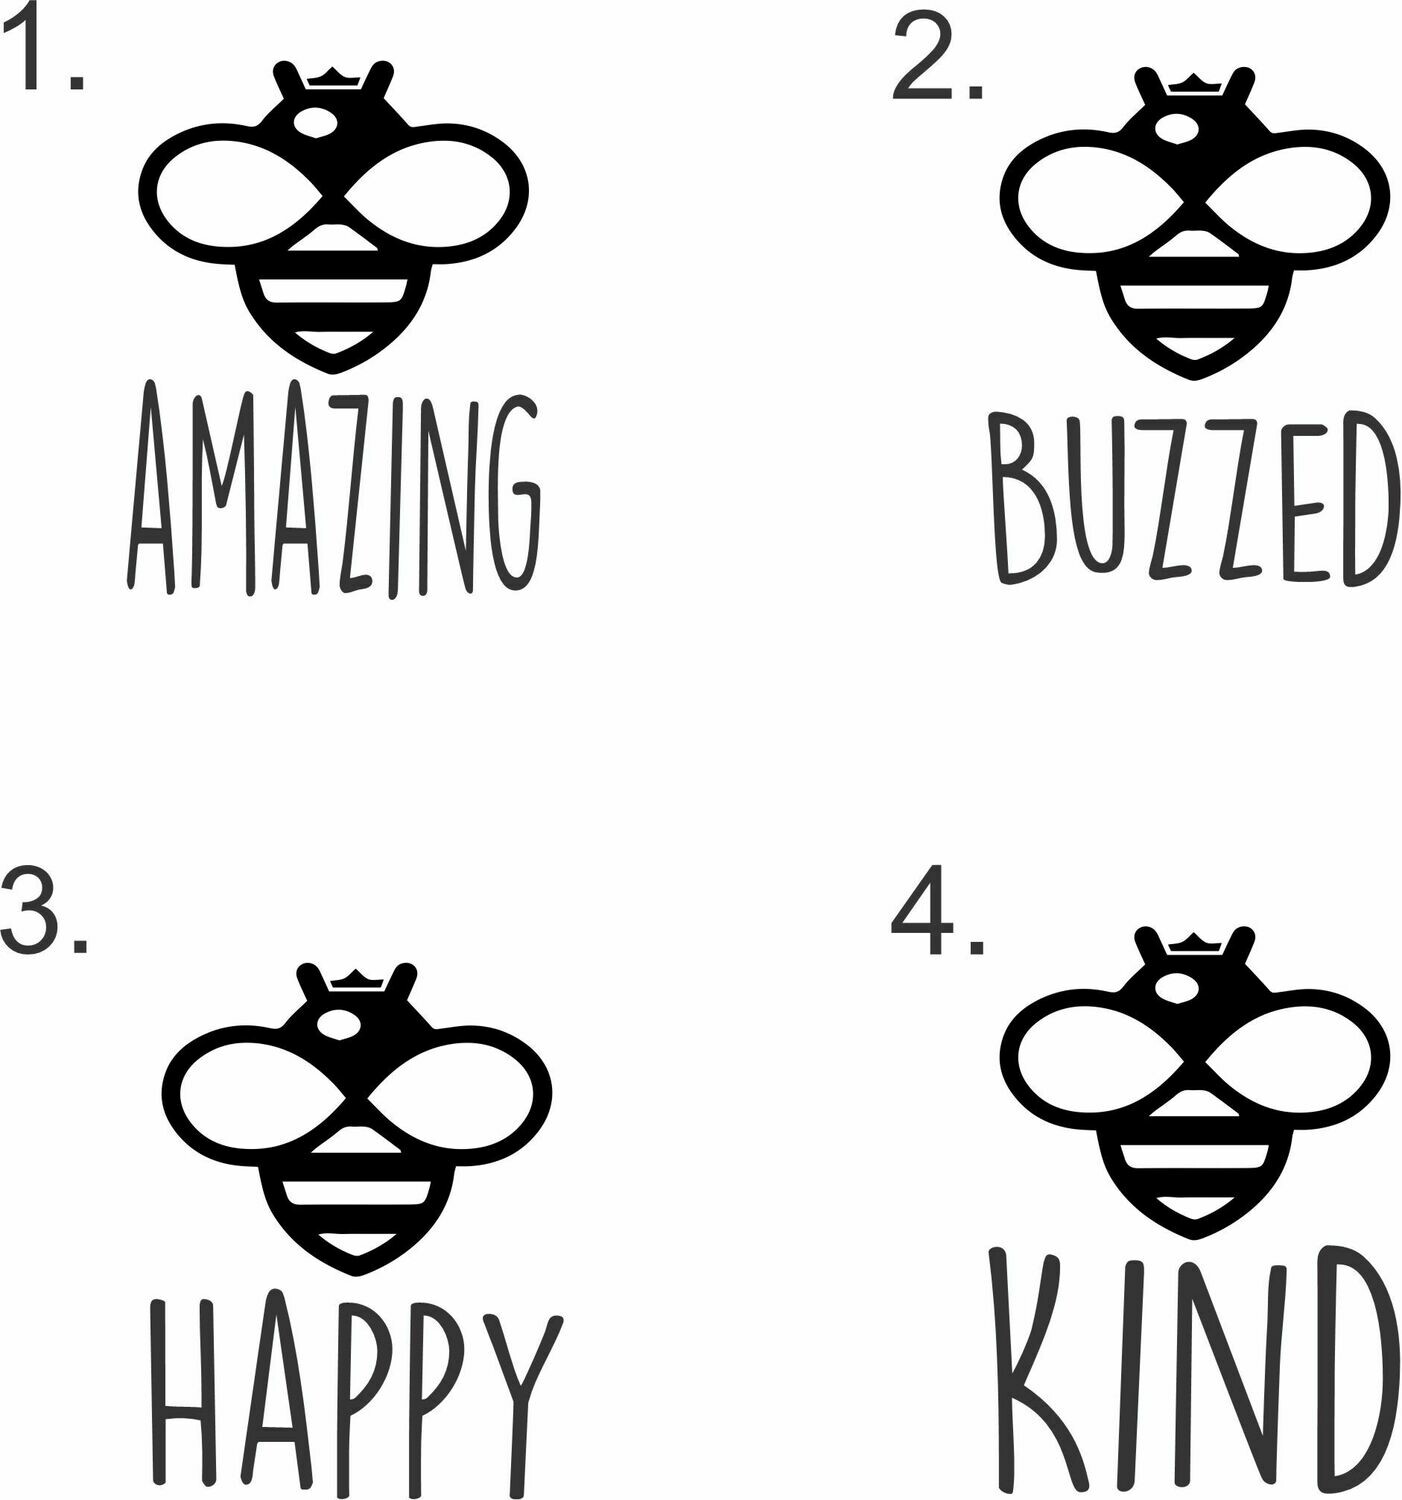 Bee Phrases (Amazing, Buzzed, Happy, Kind, or Your Word) Hand-Painted Wood Coaster Set